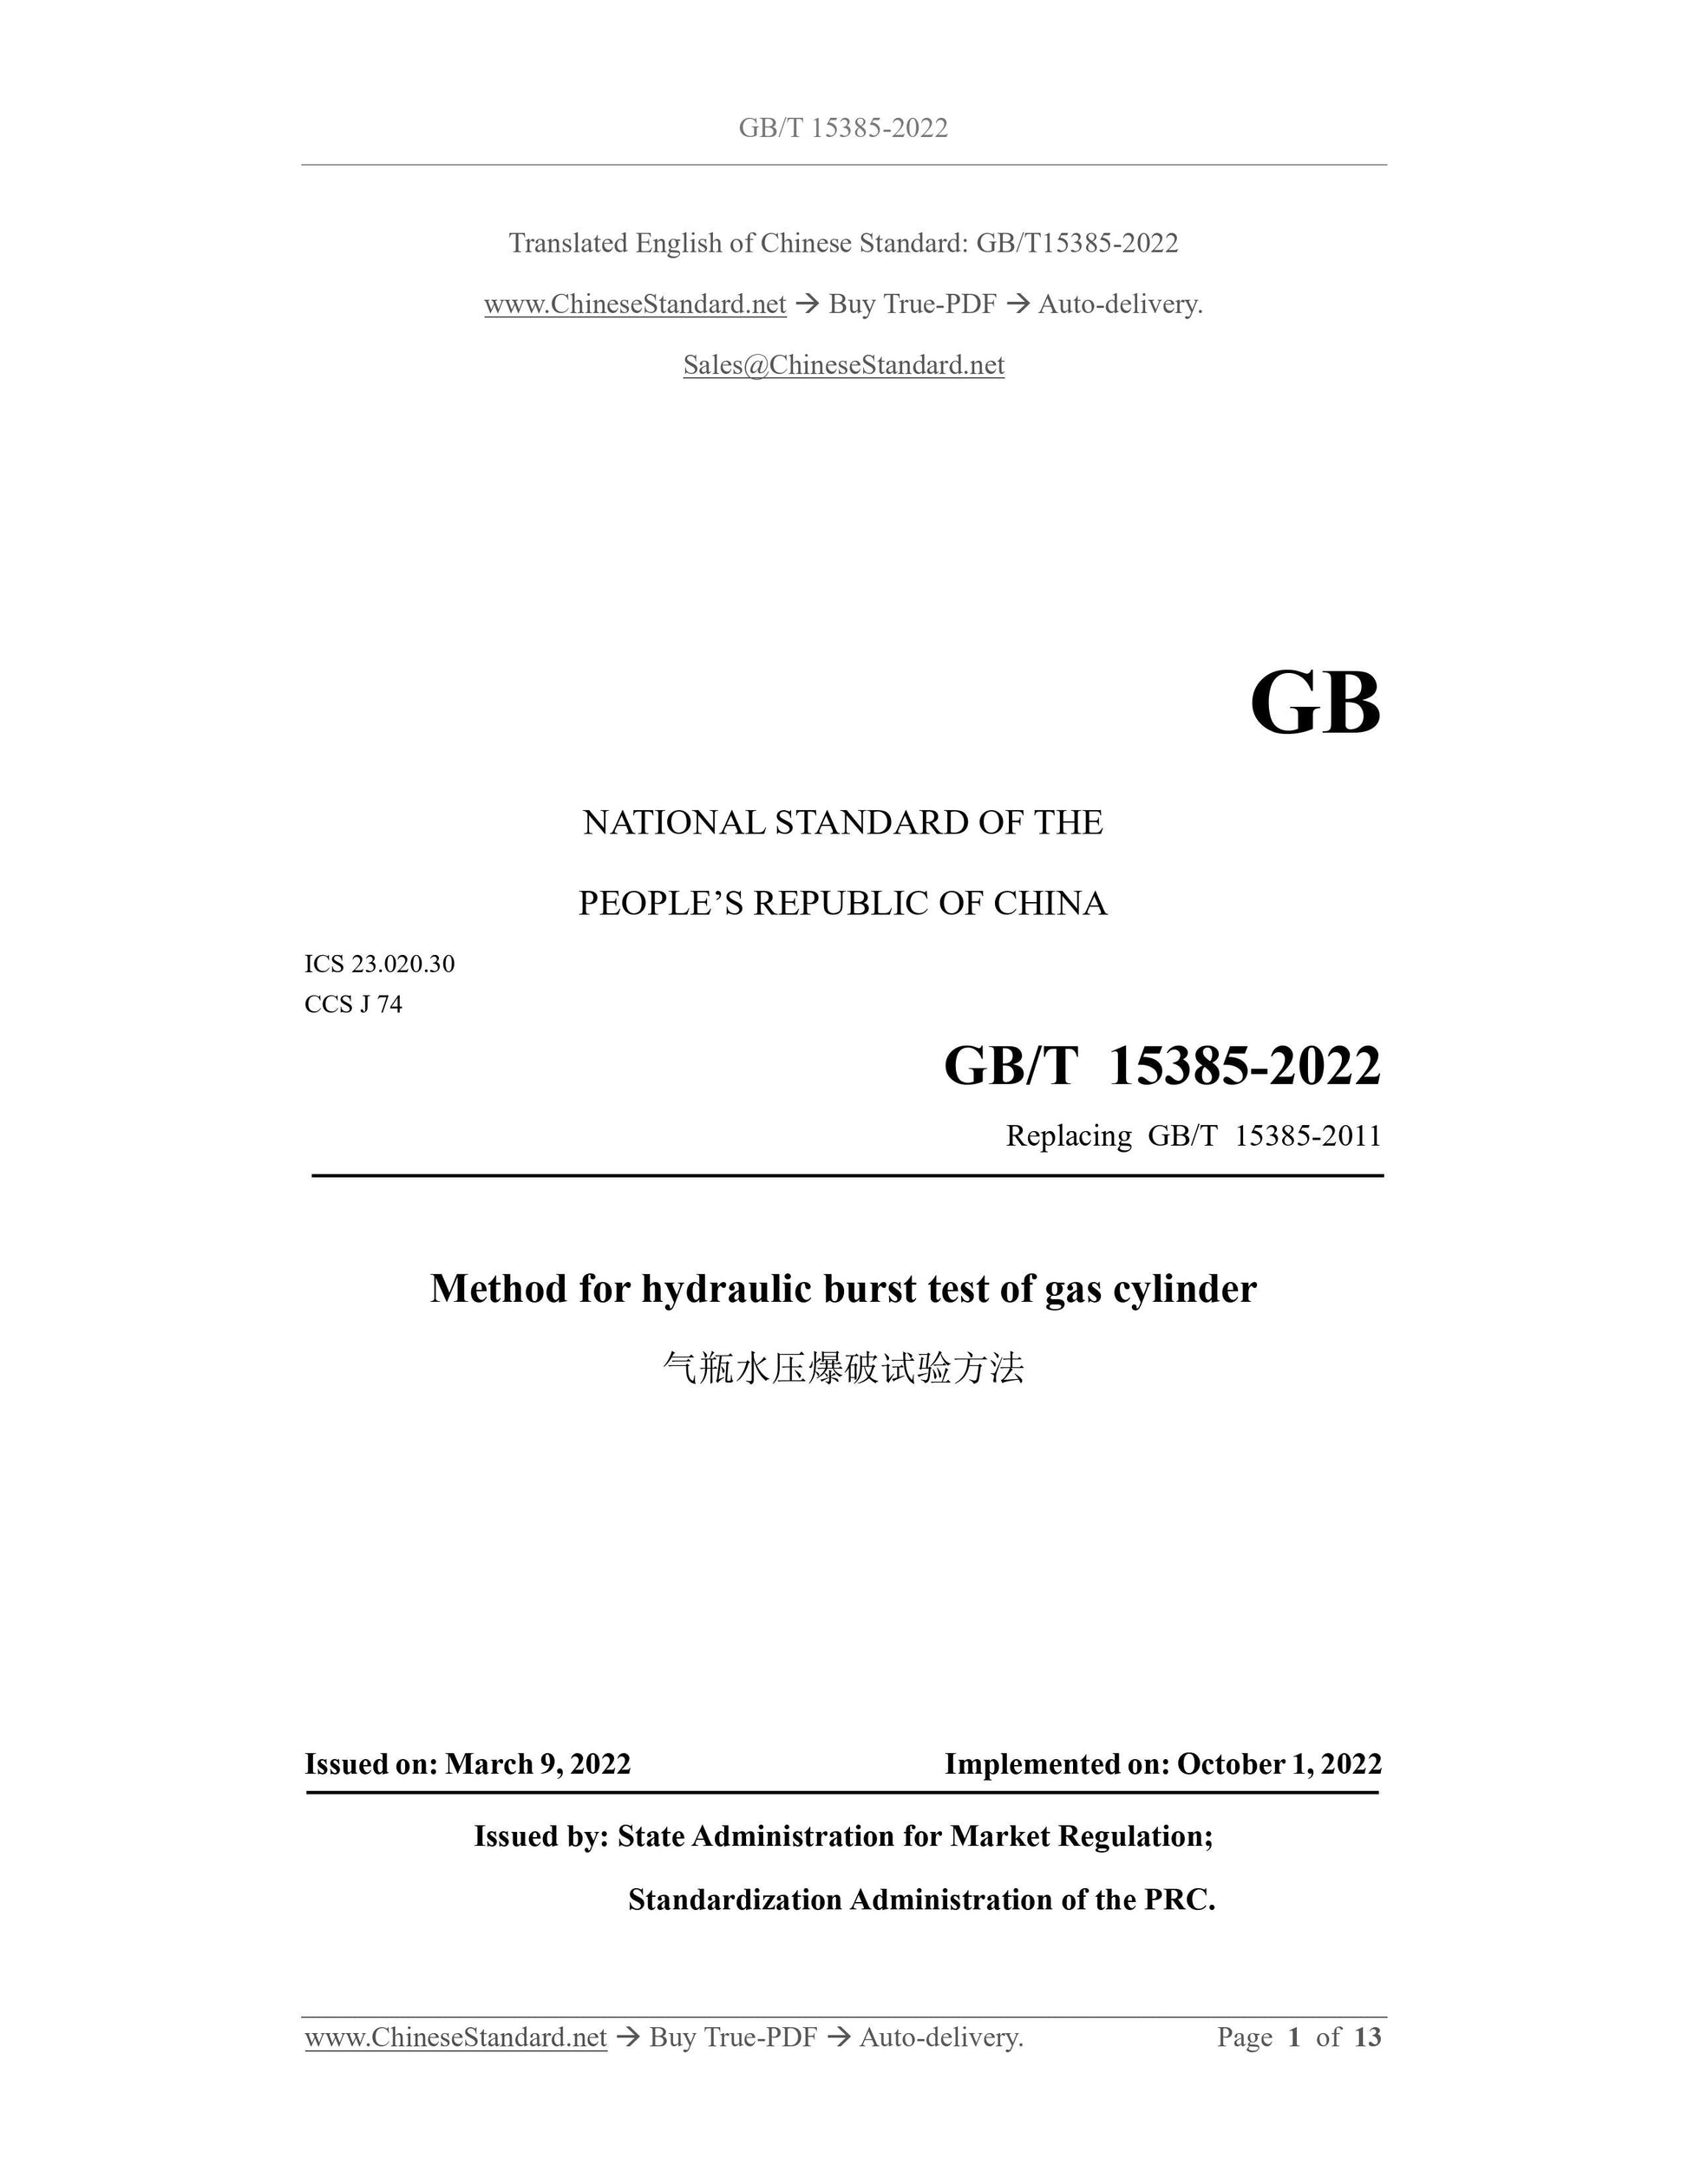 GB/T 15385-2022 Page 1